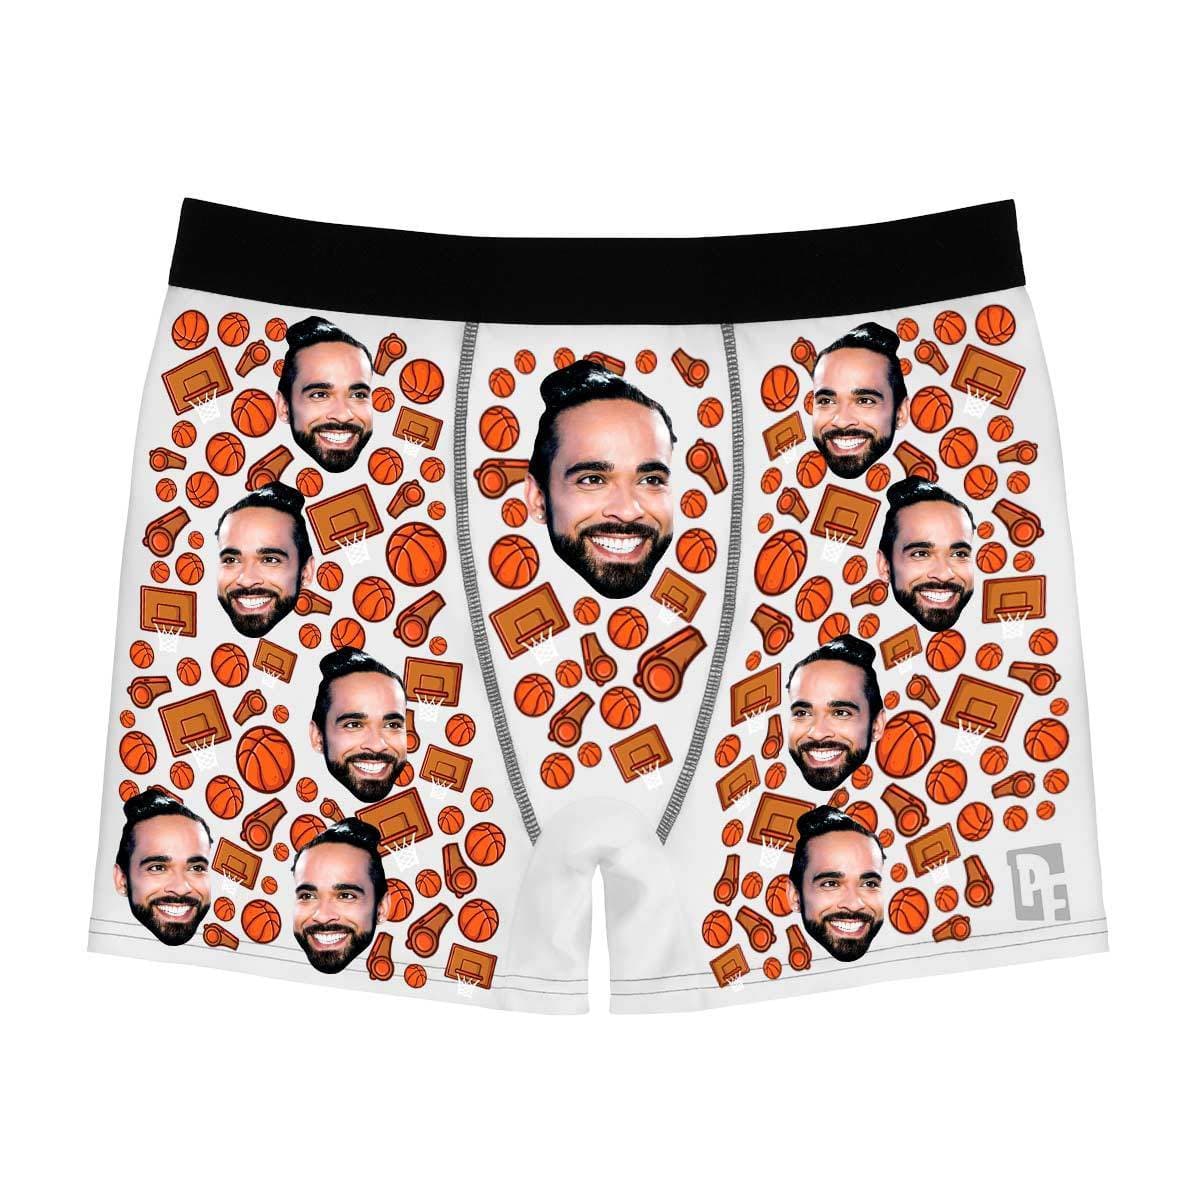 White Basketball men's boxer briefs personalized with photo printed on them